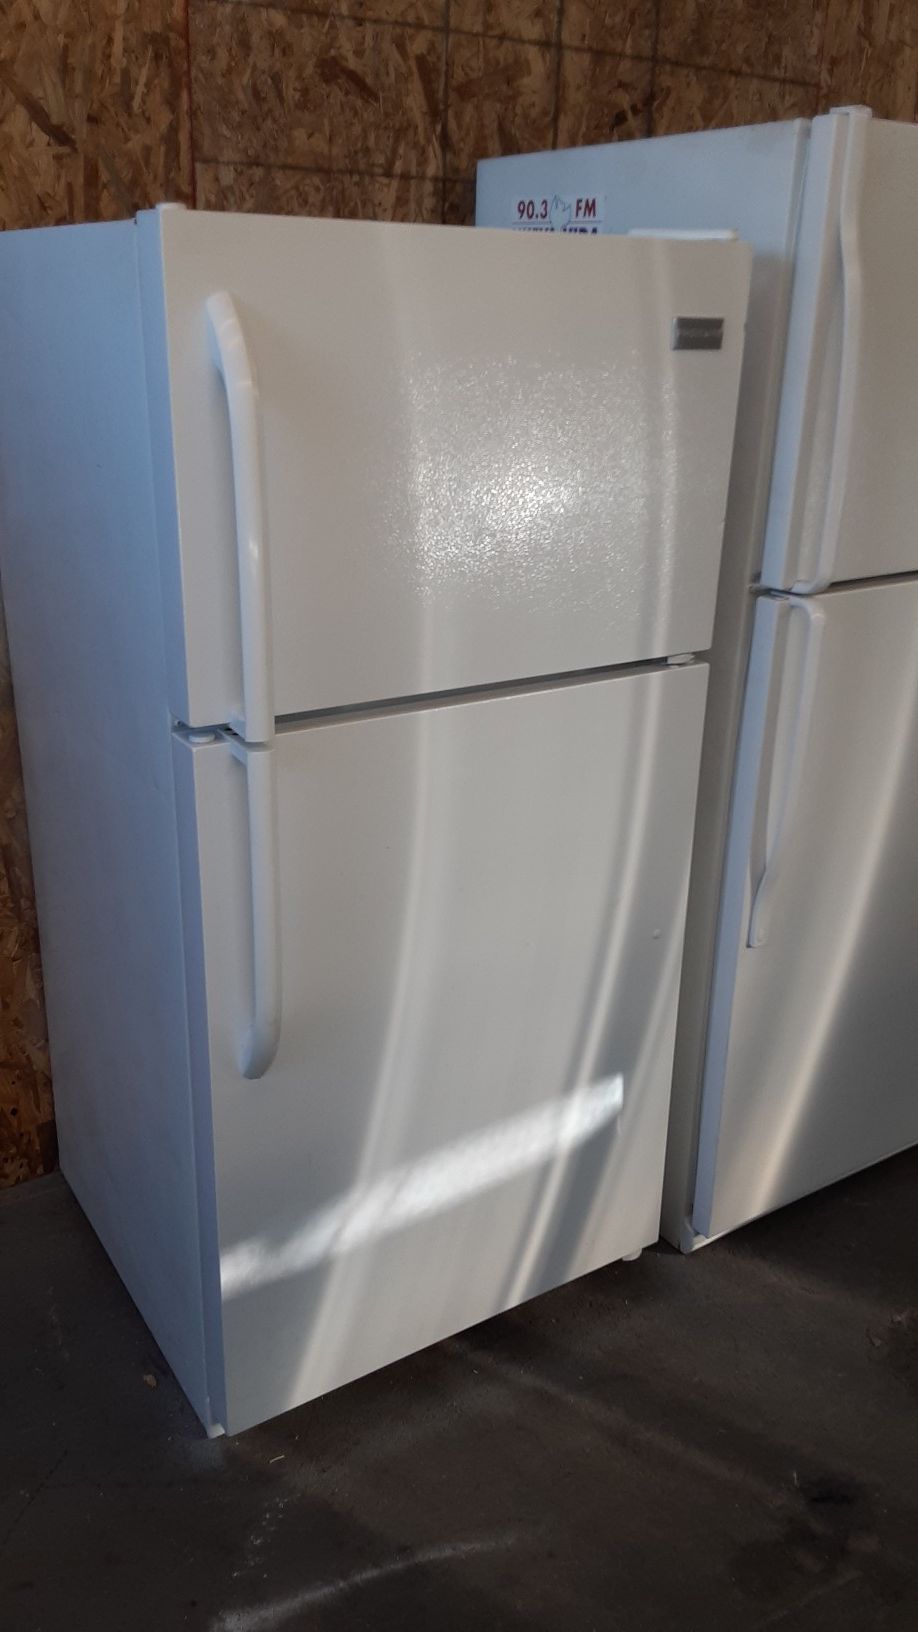 $199 Frigidaire white 14 cubic fridge includes delivery in the San Fernando Valley a warranty and installation